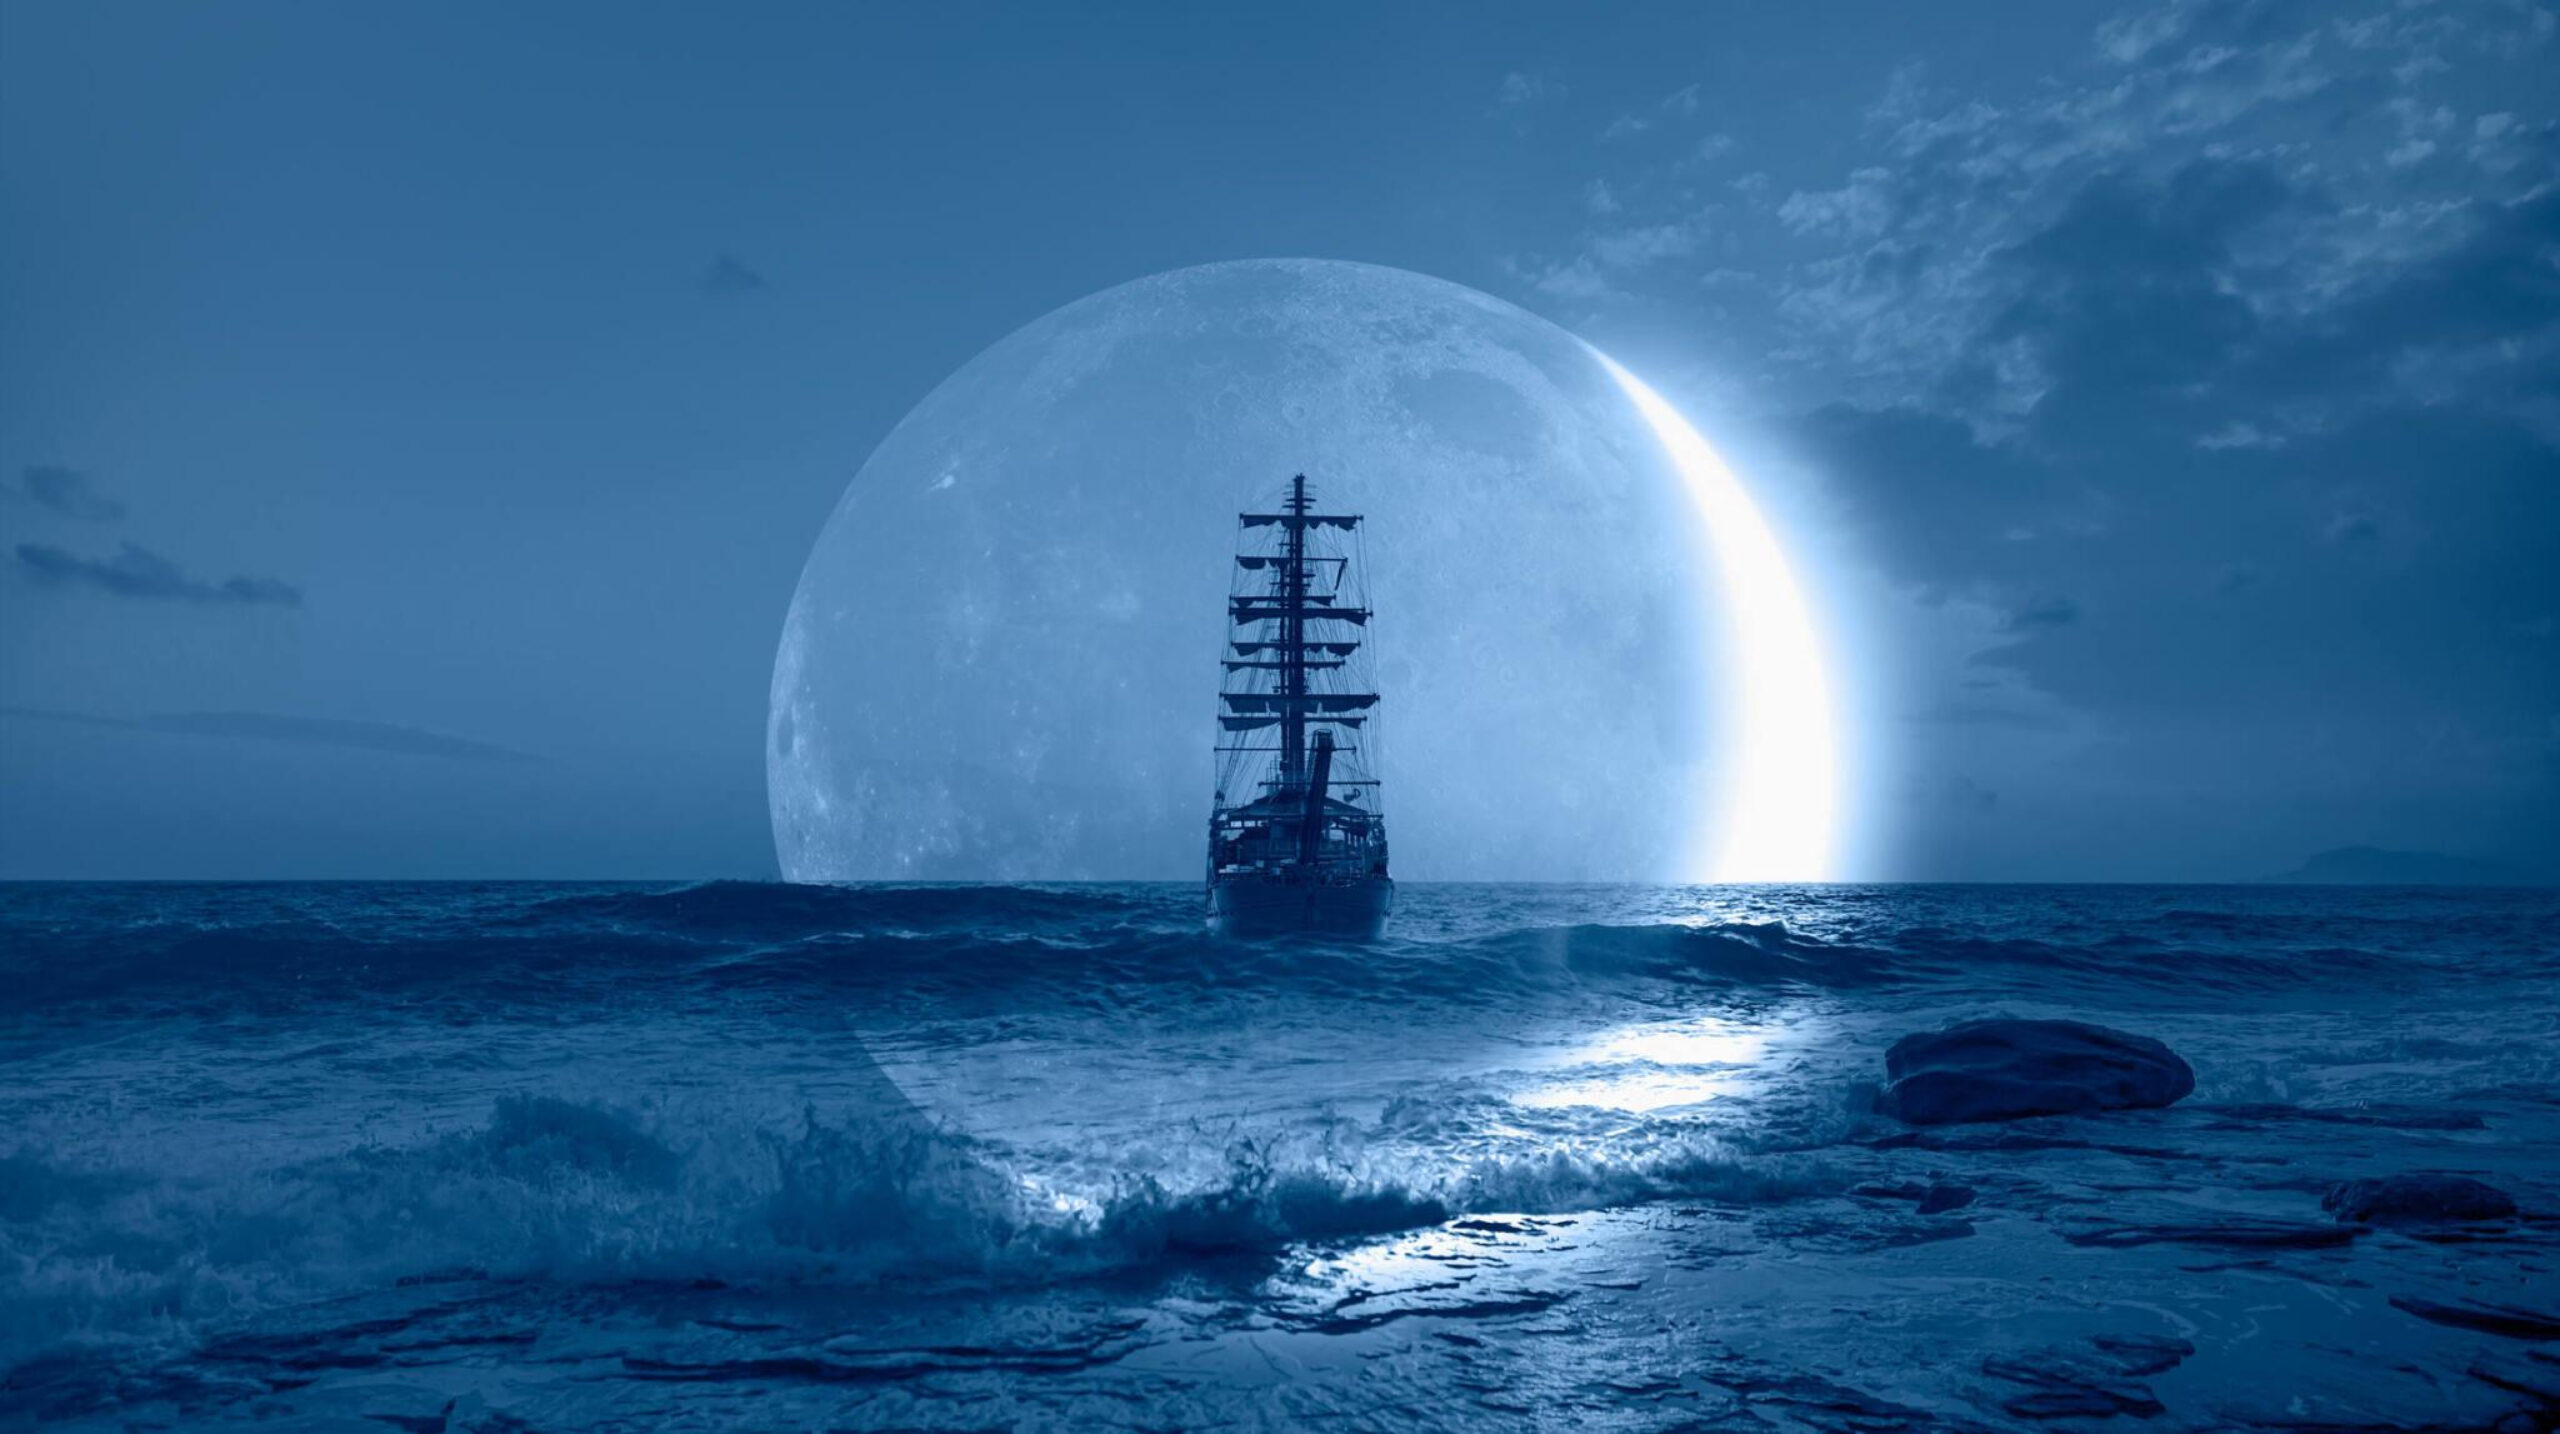 The Golden Age of Piracy - Photo by Istock at Istock